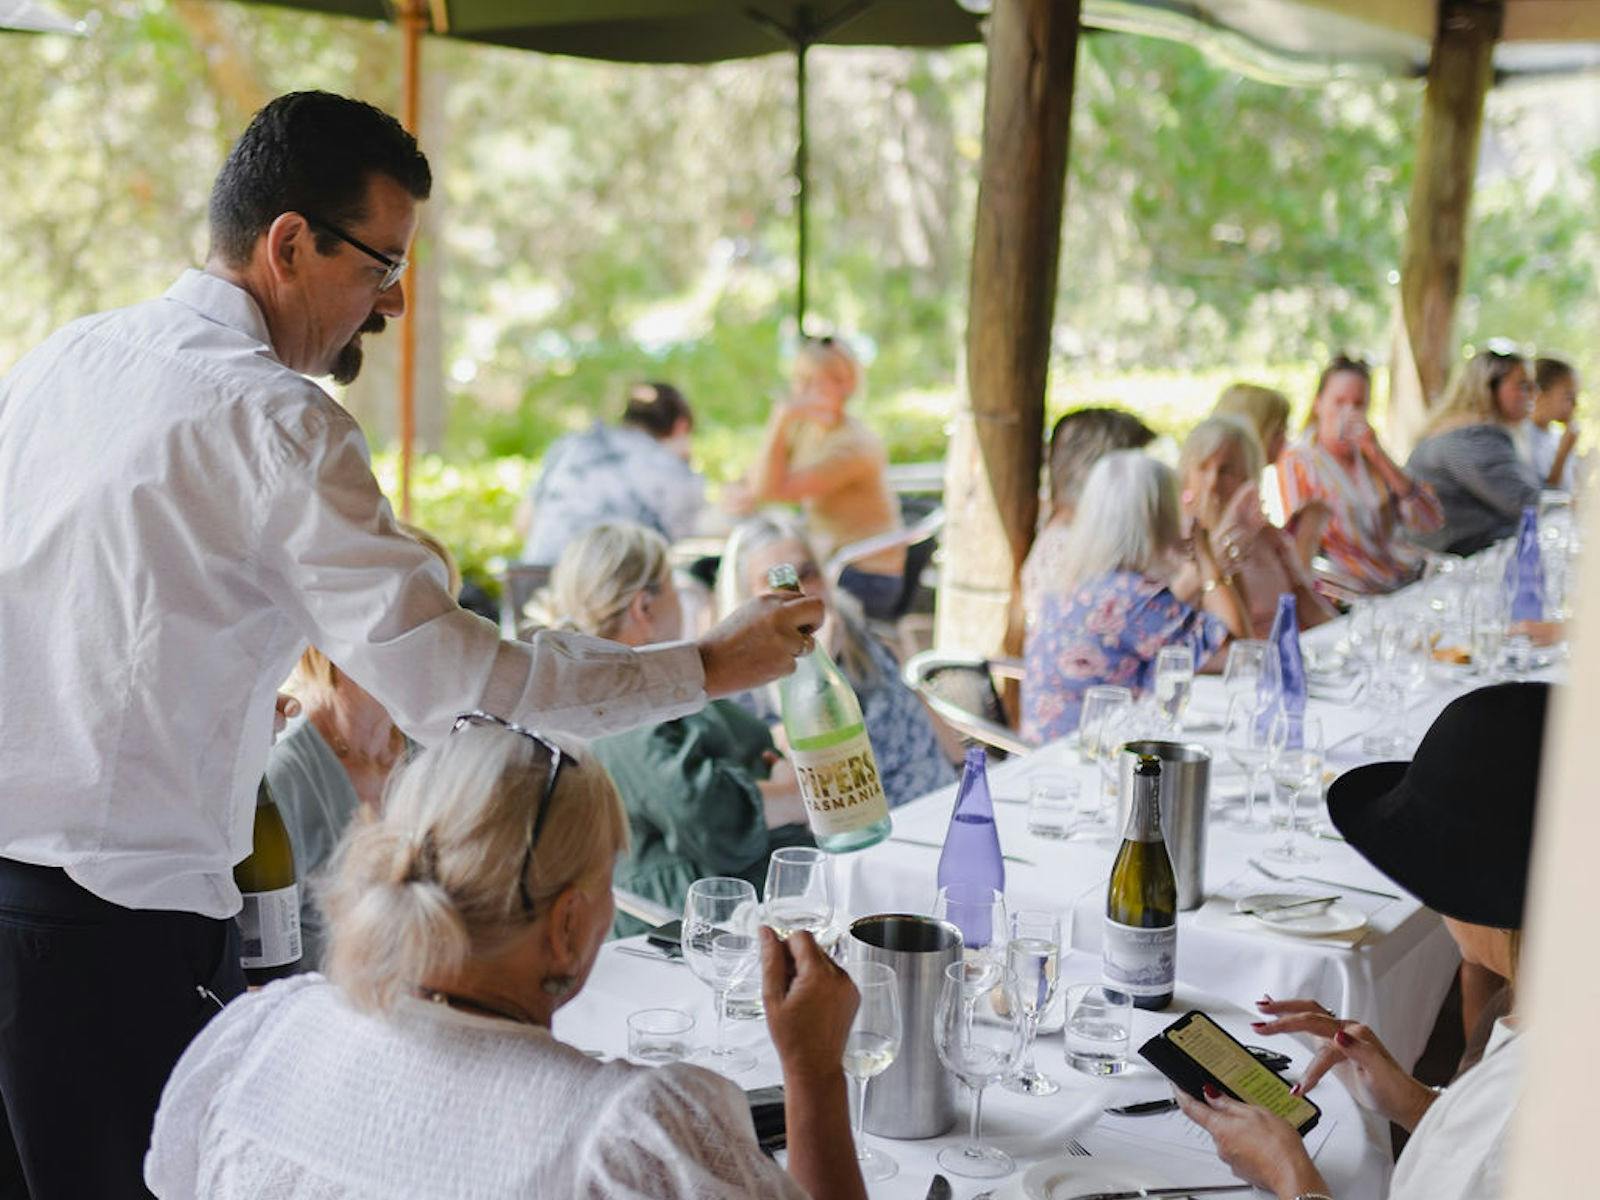 Adrian serving local wine at an outdoor fine dining table filled with delicious food with guests.